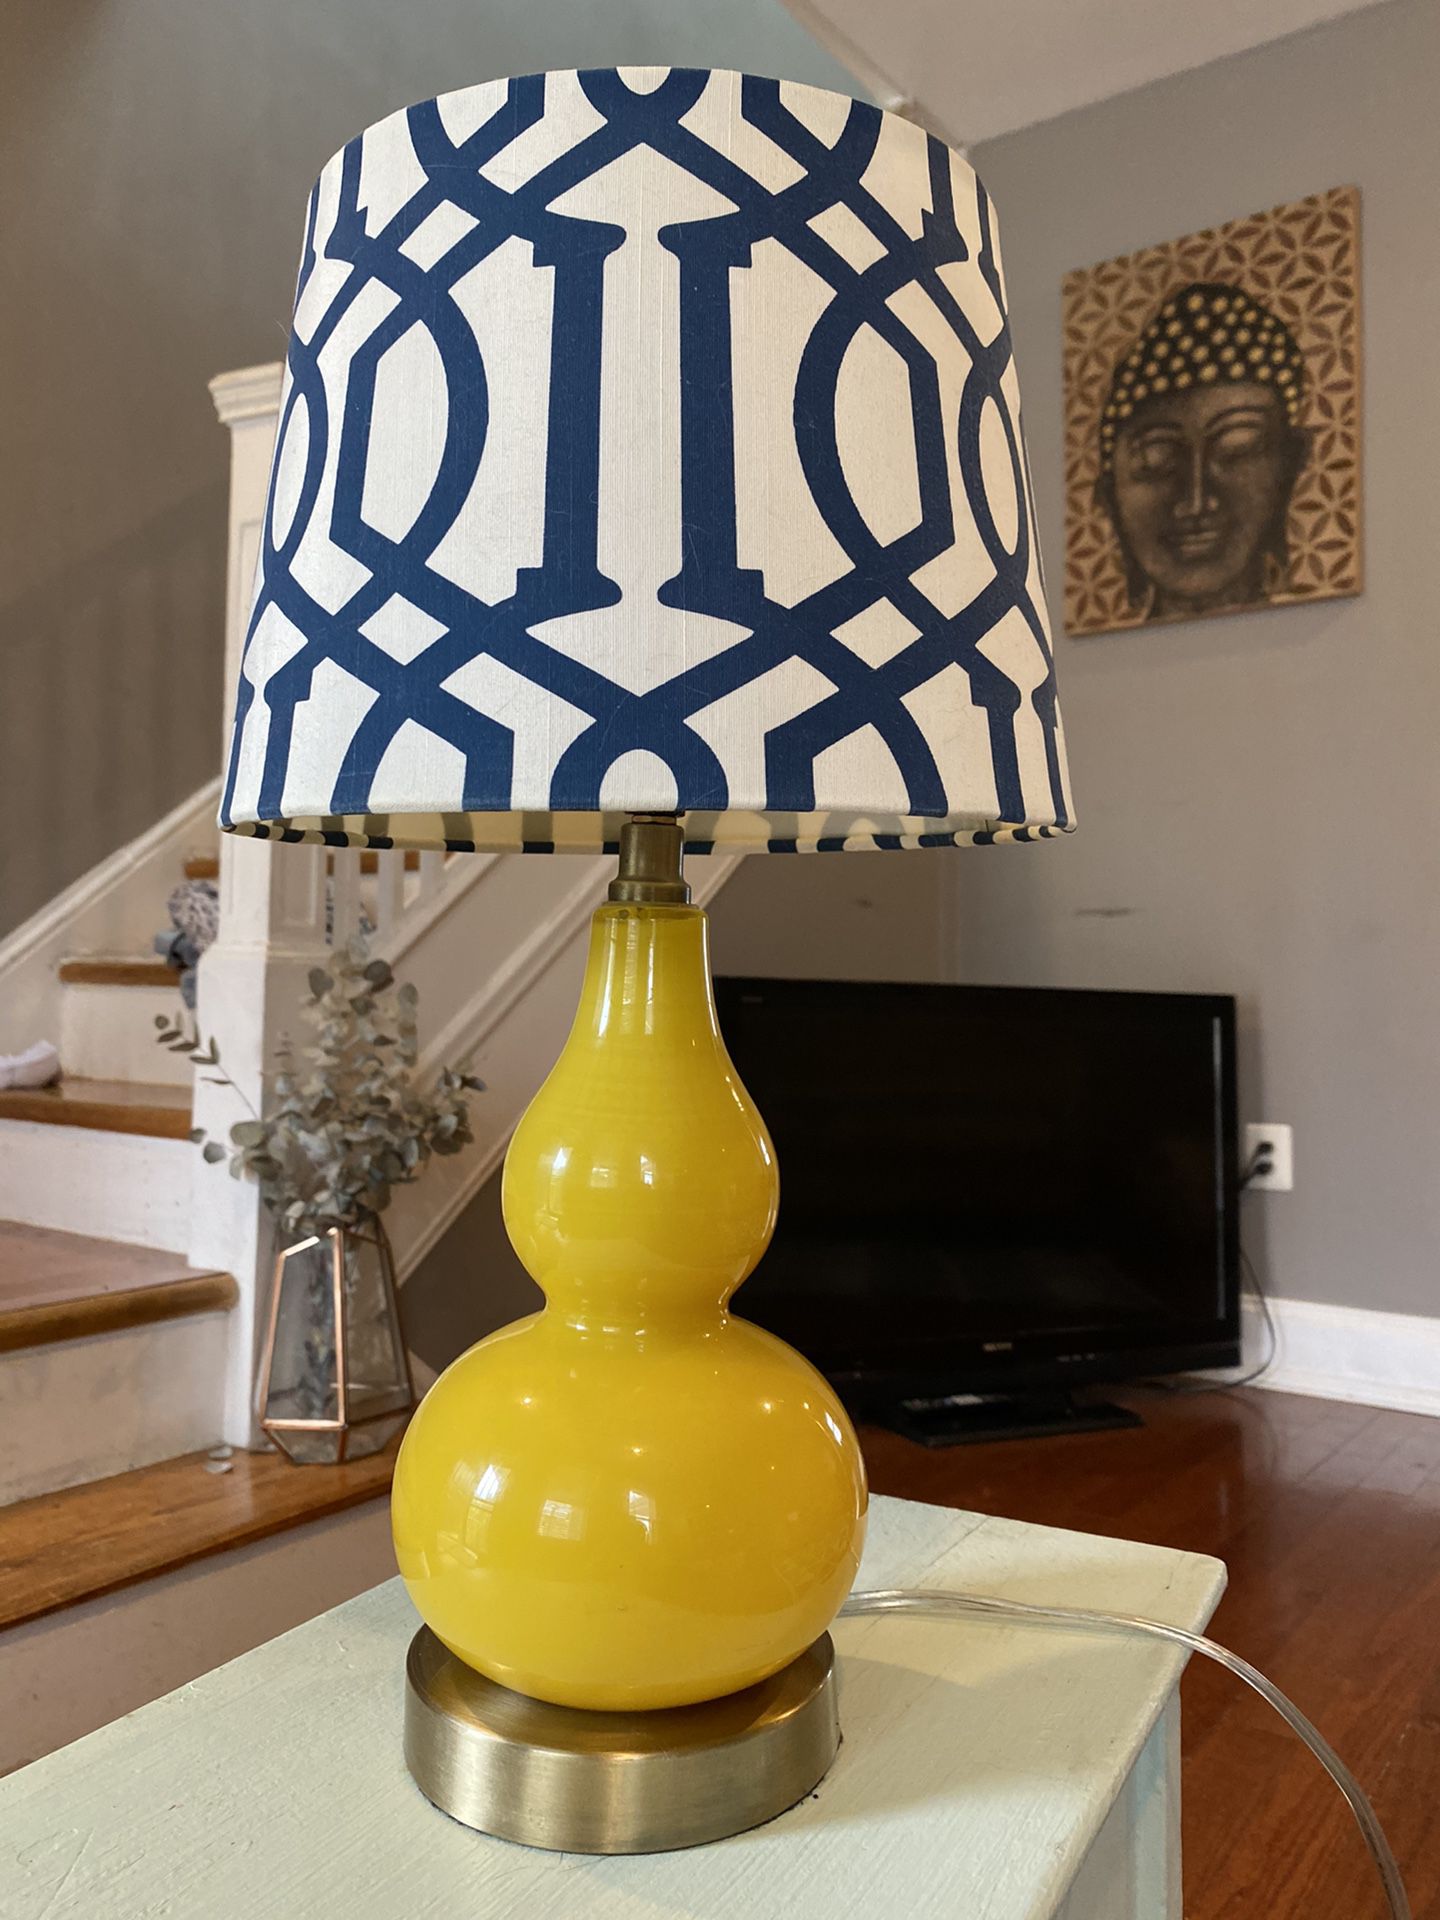 Blown glass lamp w shade. Lightbulb included!